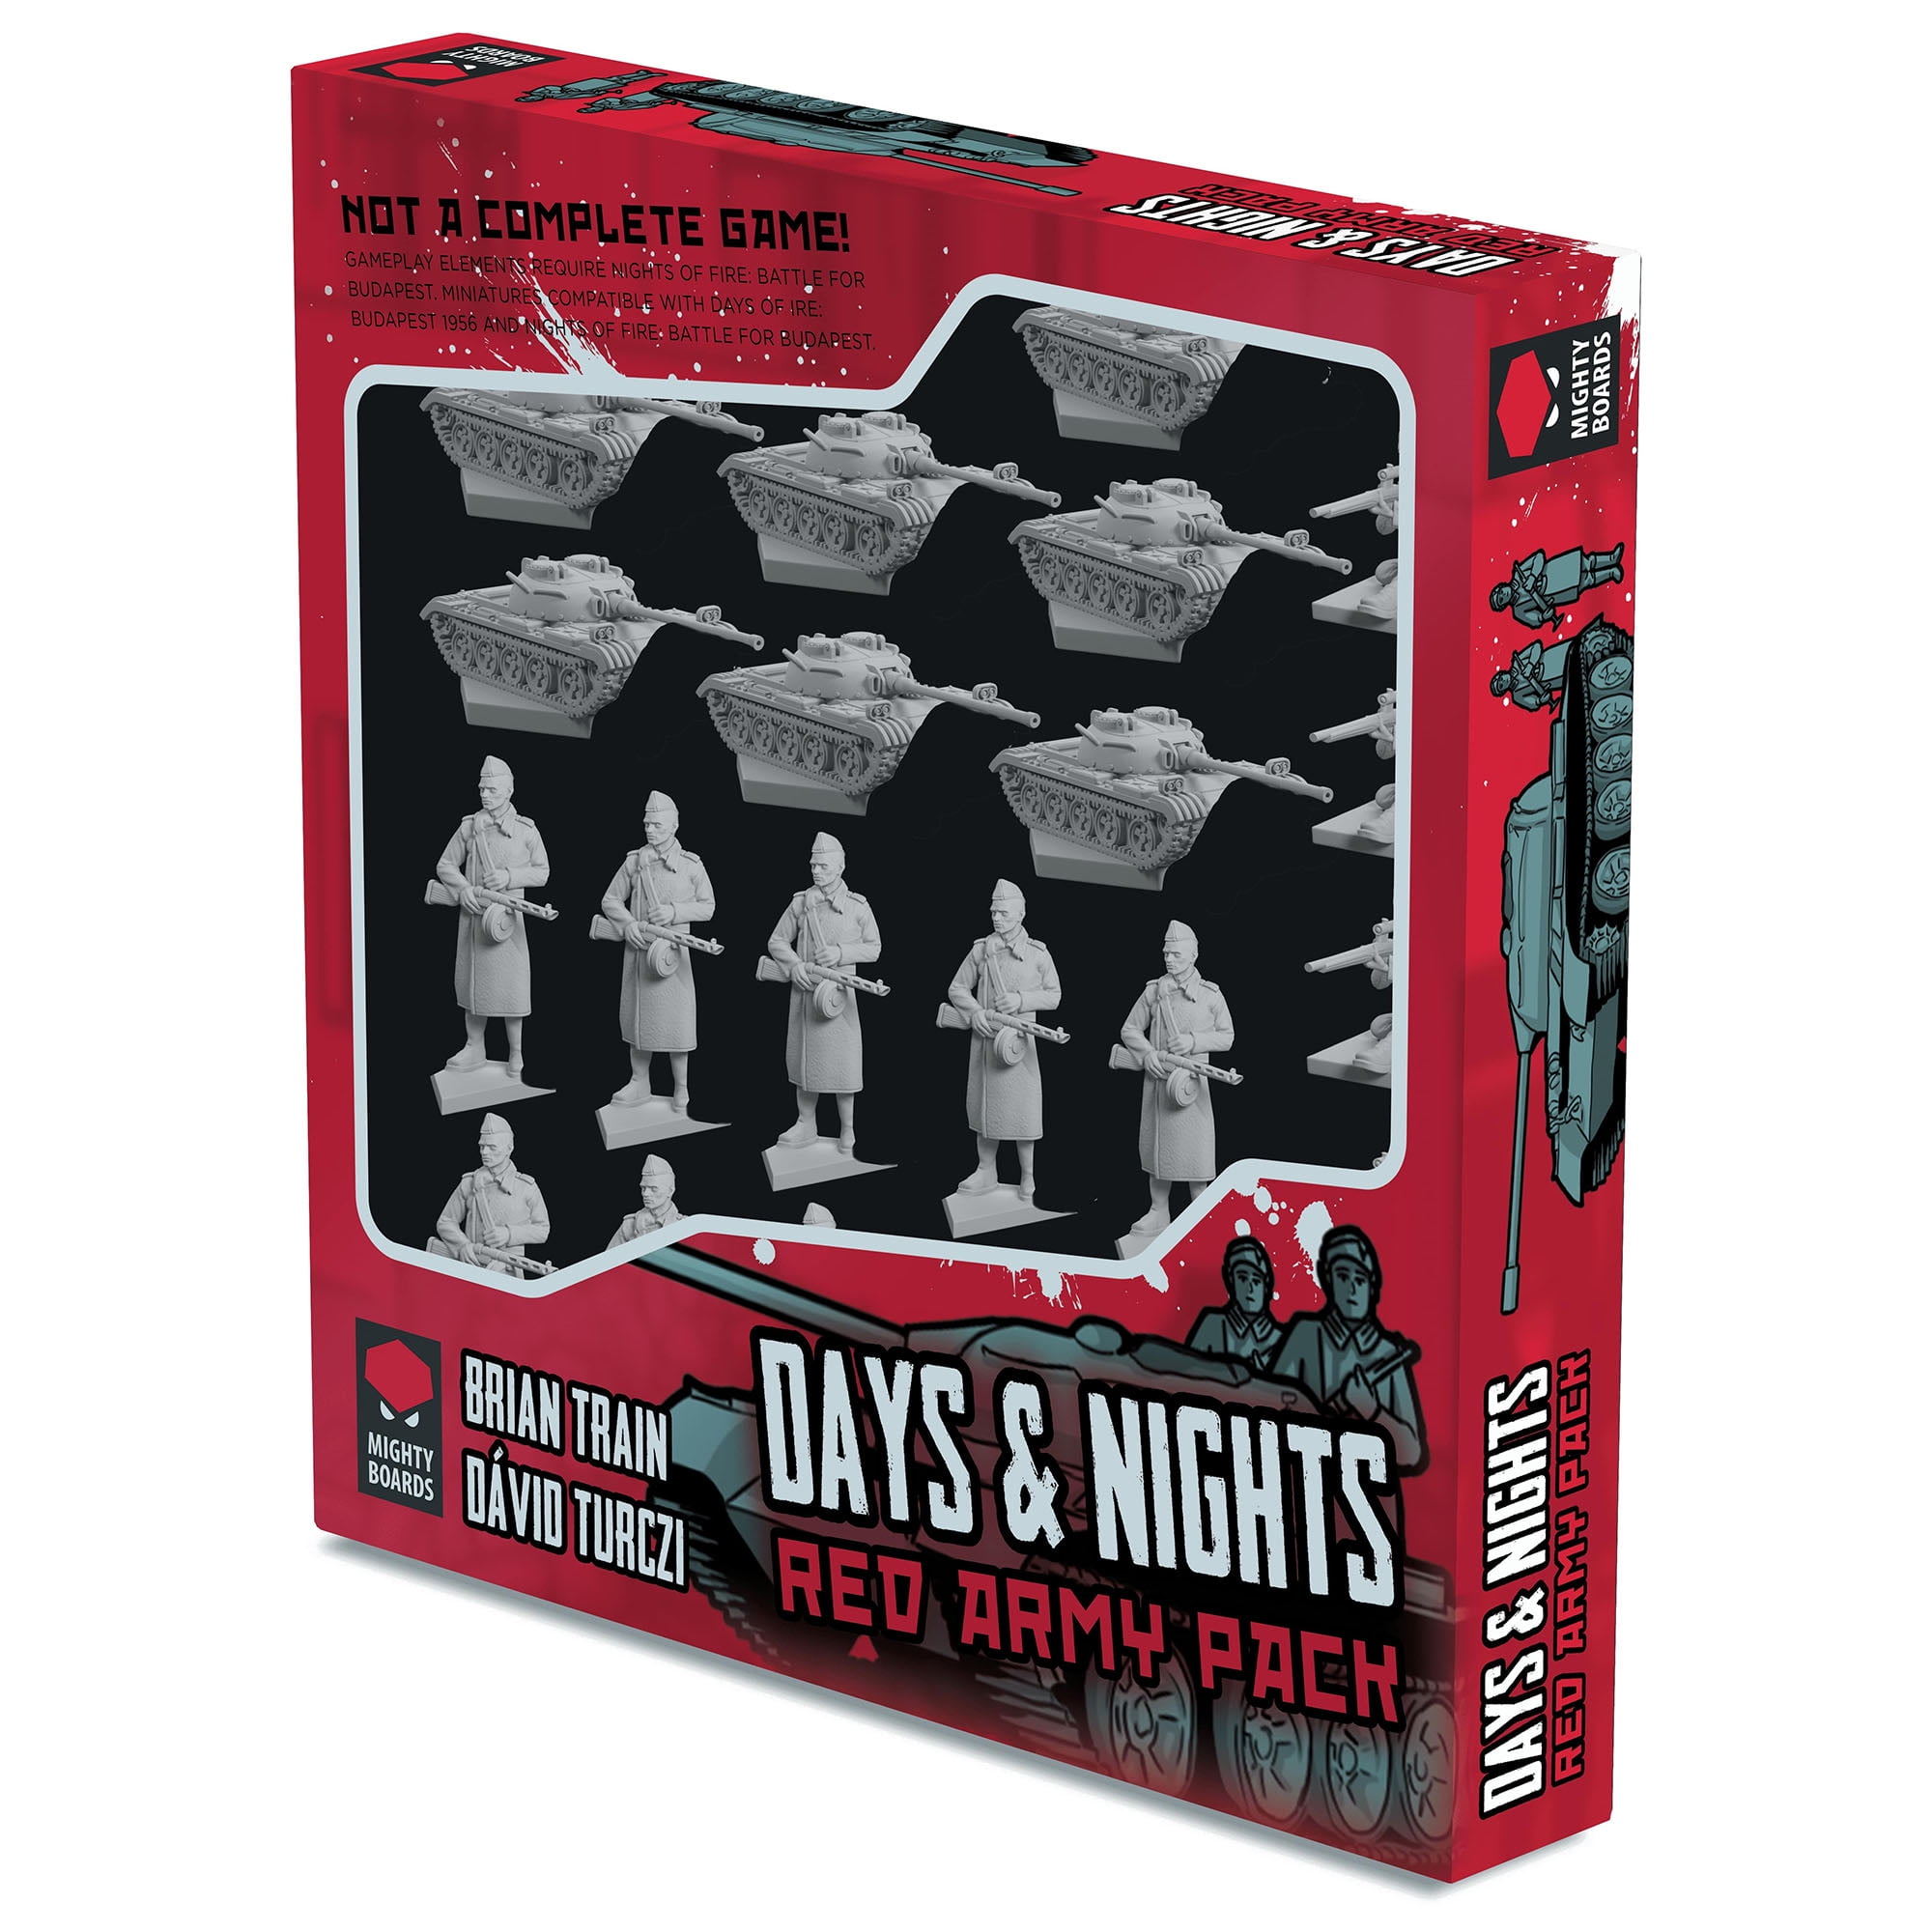 Mib1026ra Days & Nights Red Army Expansion Board Game